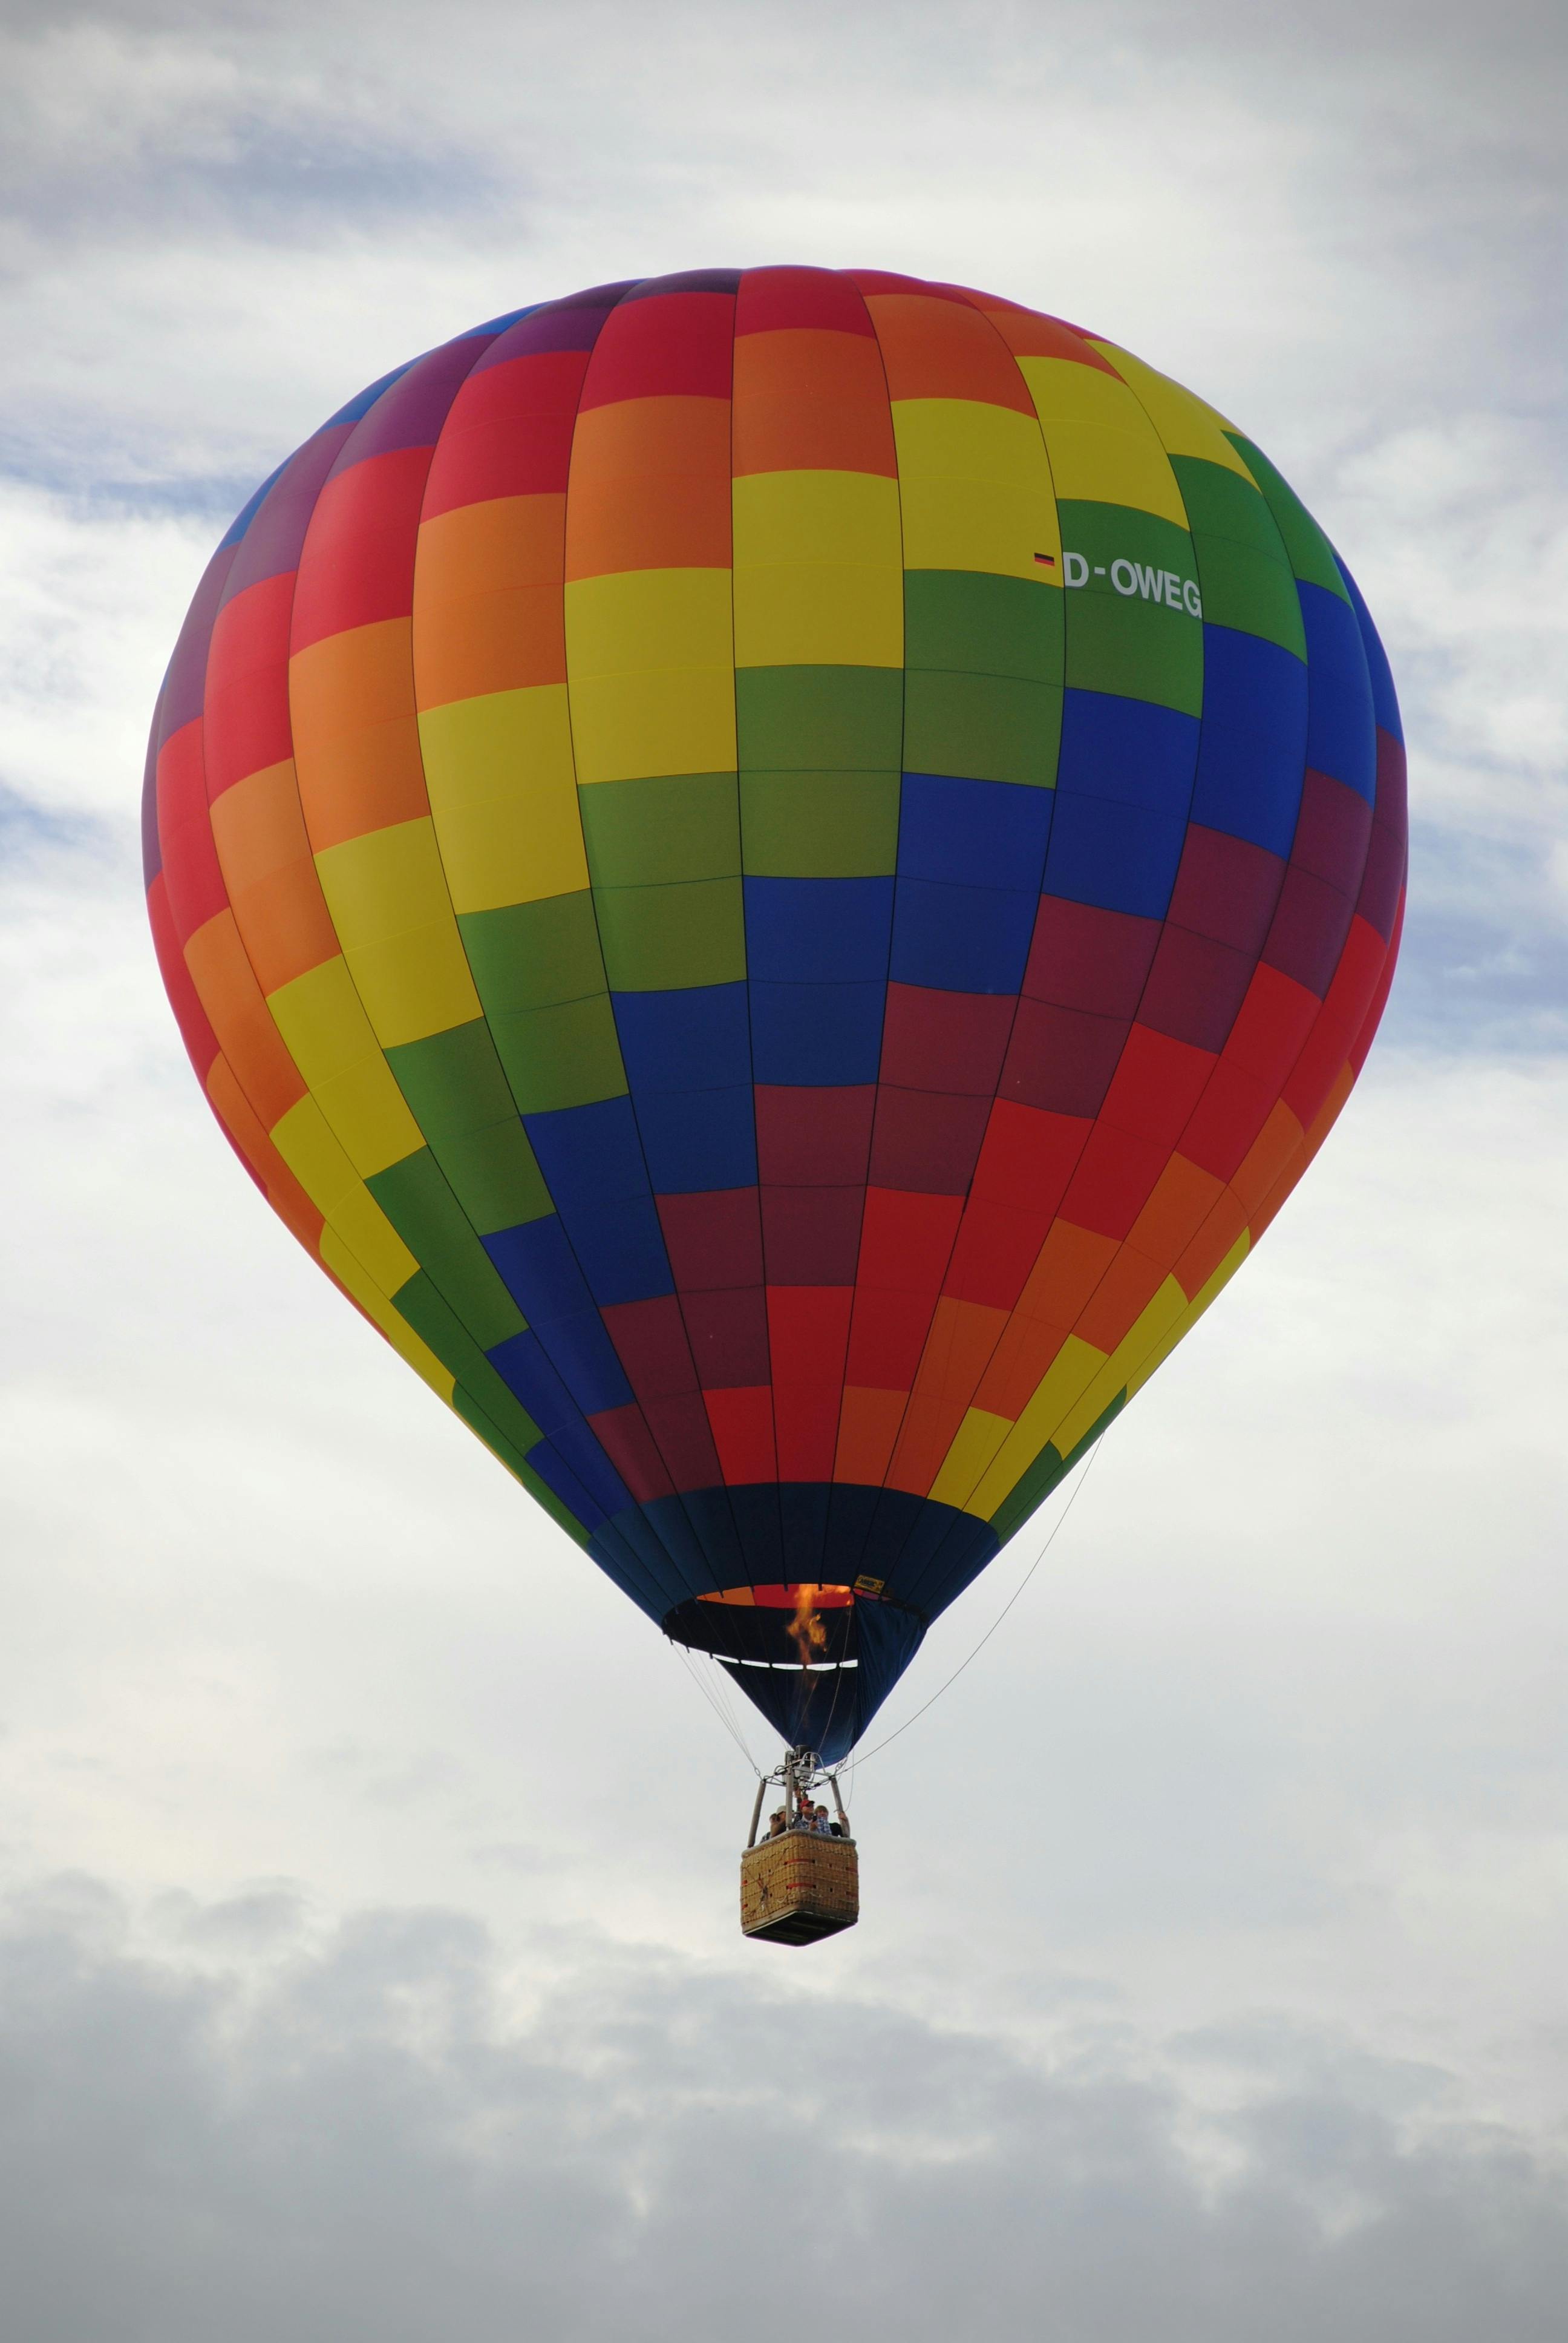 Hot Air Balloon Images Outlet 100 Save 47 Jlcatj gob mx